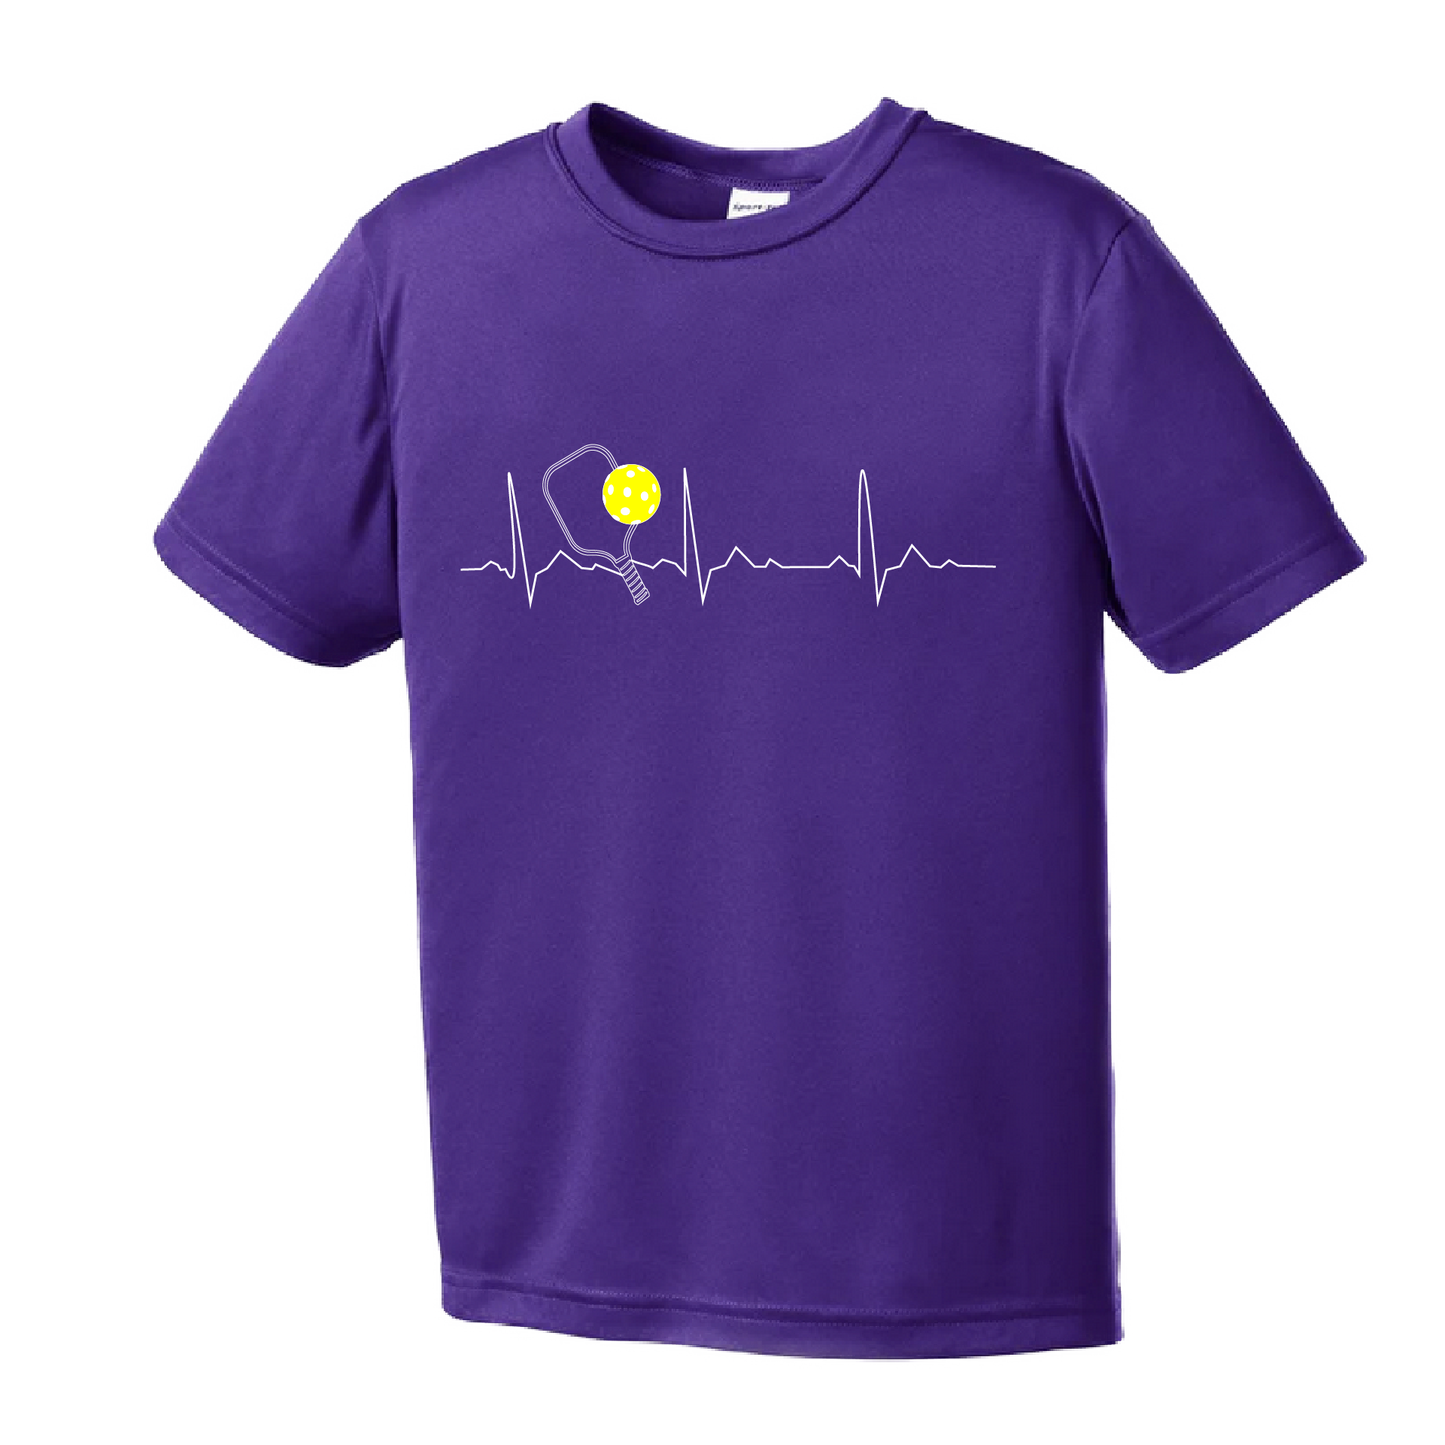 Pickleball Design: Heartbeat  Youth Styles: Short Sleeve  Shirts are lightweight, roomy and highly breathable. These moisture-wicking shirts are designed for athletic performance. They feature PosiCharge technology to lock in color and prevent logos from fading. Removable tag and set-in sleeves for comfort.